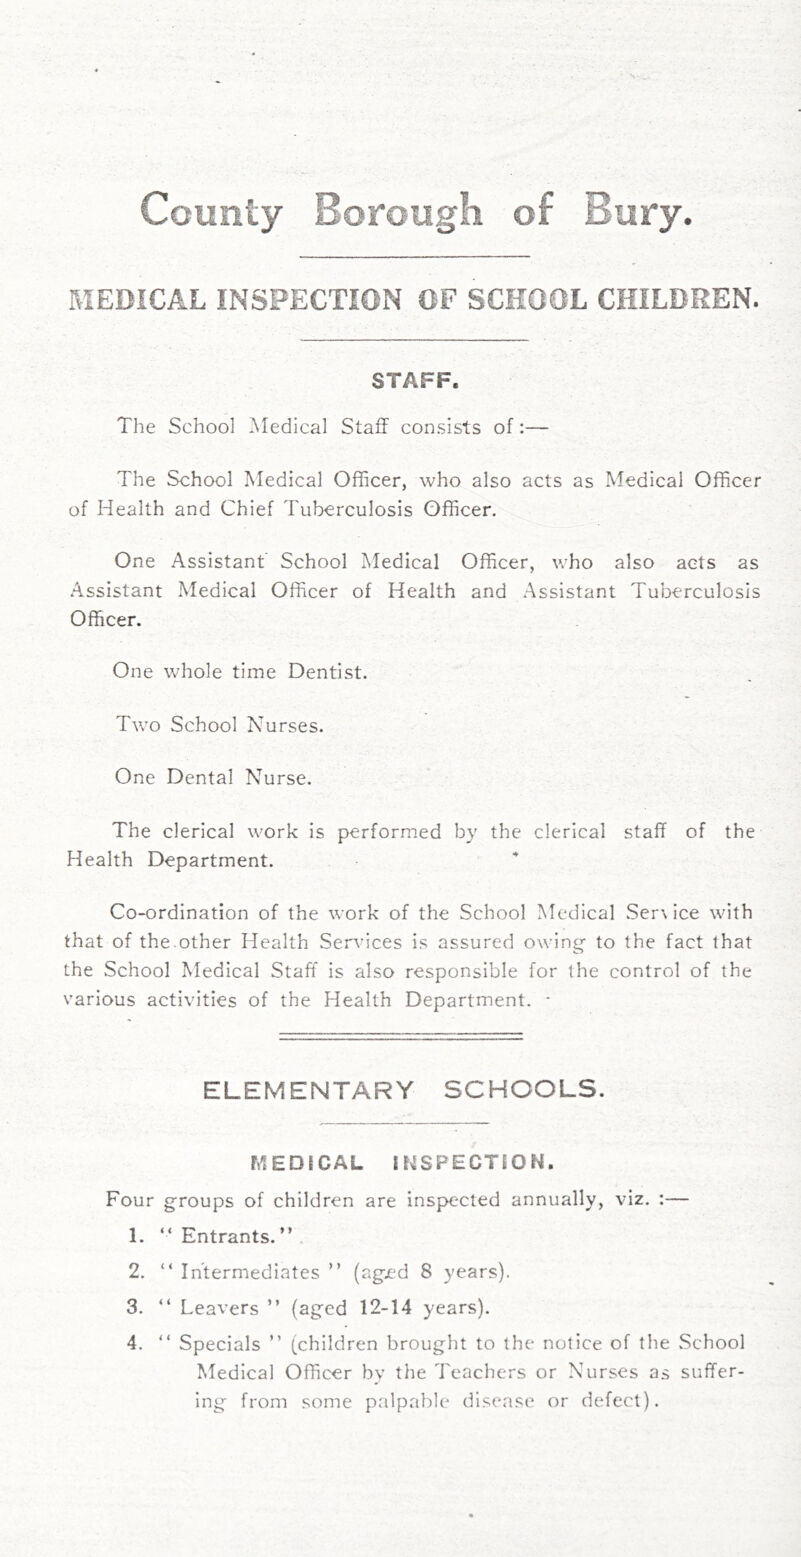 MEDICAL INSPECTION OF SCHOOL CHILDREN. STAFF. The School Medical Staff consists of:— The School Medical Officer, who also acts as Medical Officer of Health and Chief Tuberculosis Officer. One Assistant School Medical Officer, who also acts as Assistant Medical Officer of Health and Assistant Tuberculosis Officer. One whole time Dentist. Two School Nurses. One Dental Nurse. The clerical work is performed by the clerical staff of the Health Department. Co-ordination of the work of the School Medical Ser\ ice with that of the.other Health Ser^dces is assured owing to the fact that the School Medical Staff is also responsible for the control of the various activities of the Health Department. - ELEMENTARY SCHOOLS. MEDICAL H^SPECTiON. Four groups of children are inspected annually, viz. :— 1. “ Entrants. ” 2. “ Intermediates ” (aged 8 years). 3. “ Leavers ” (aged 12-14 years). 4. “ Specials ” (children brought to the notice of the .School Medical Officer by the Teachers or Nurses as suffer- ing from some palpable disease or defect).